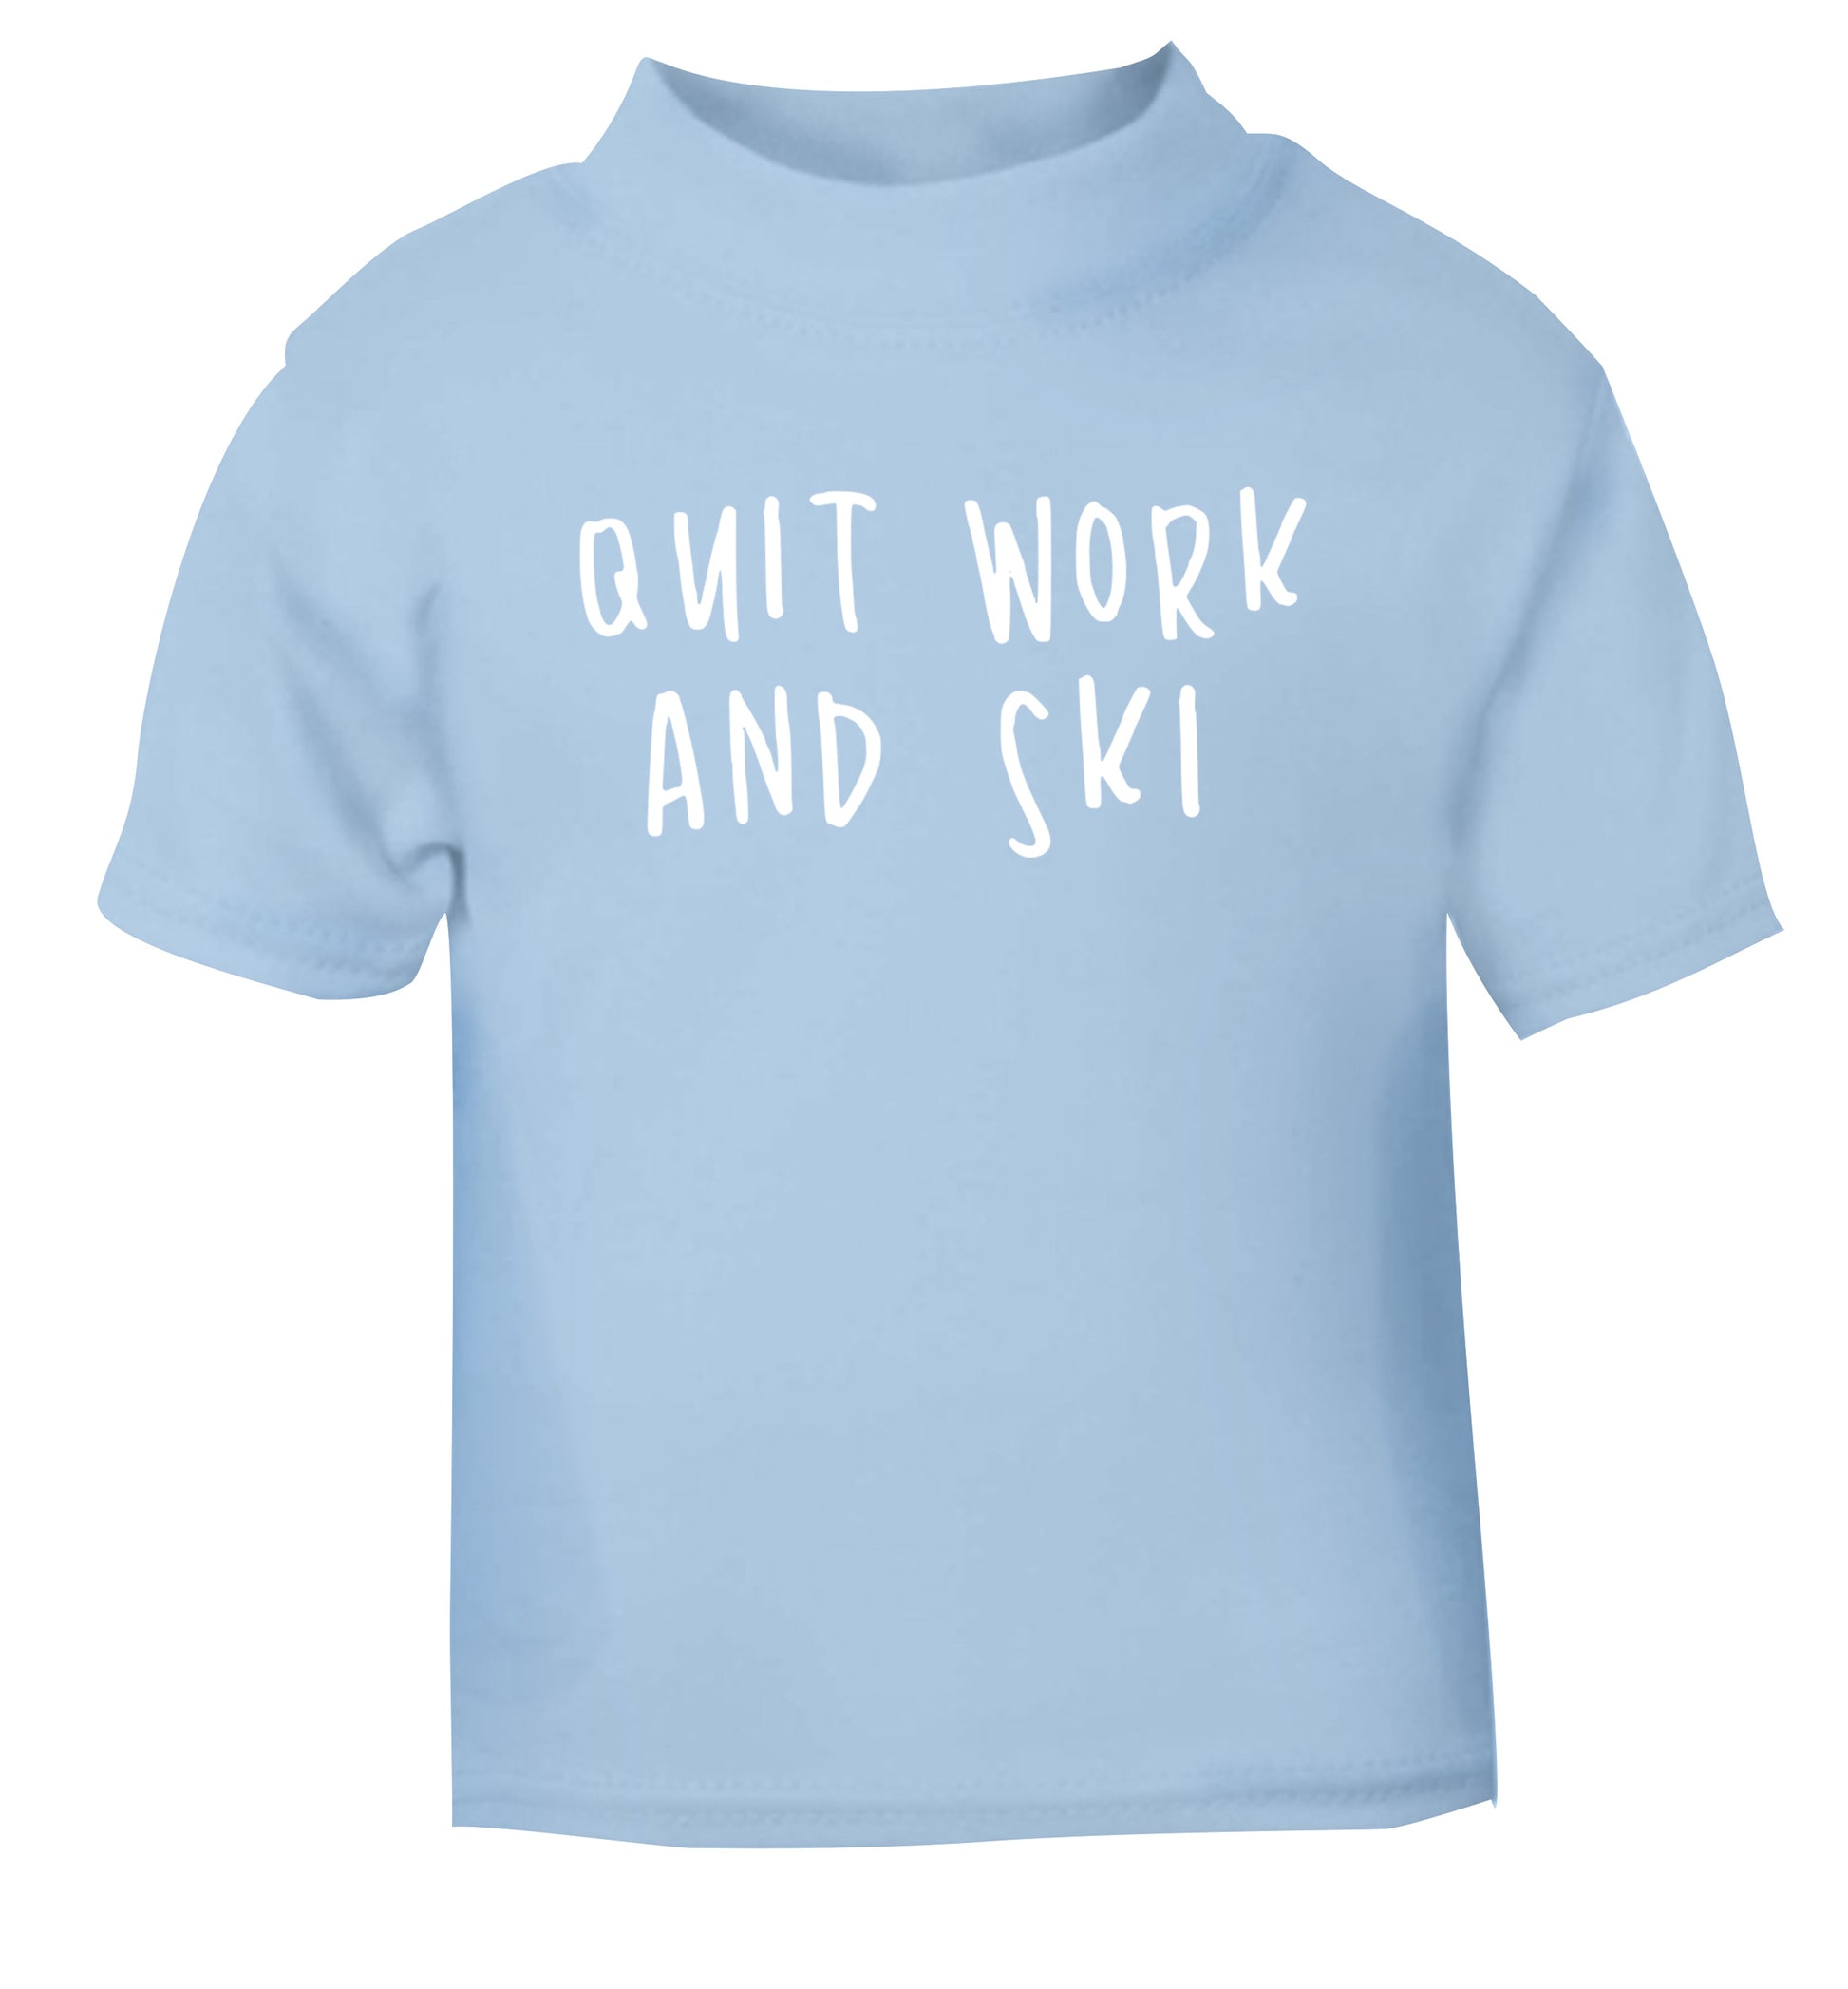 Quit work and ski light blue Baby Toddler Tshirt 2 Years